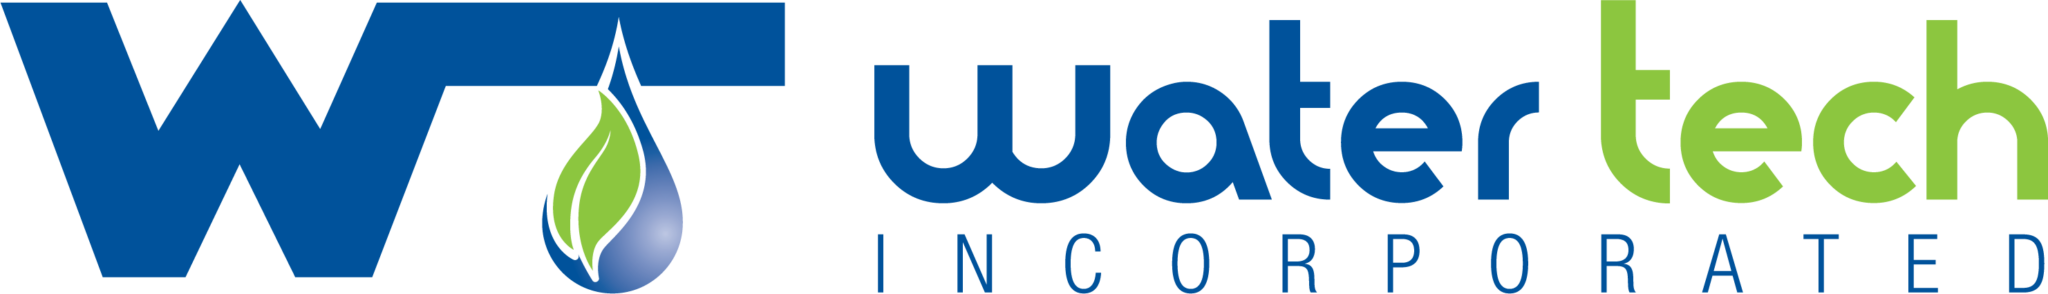 Water Tech logo: The blue "w" and blue and green water drop to the left of "Water tech INCORPORATED."